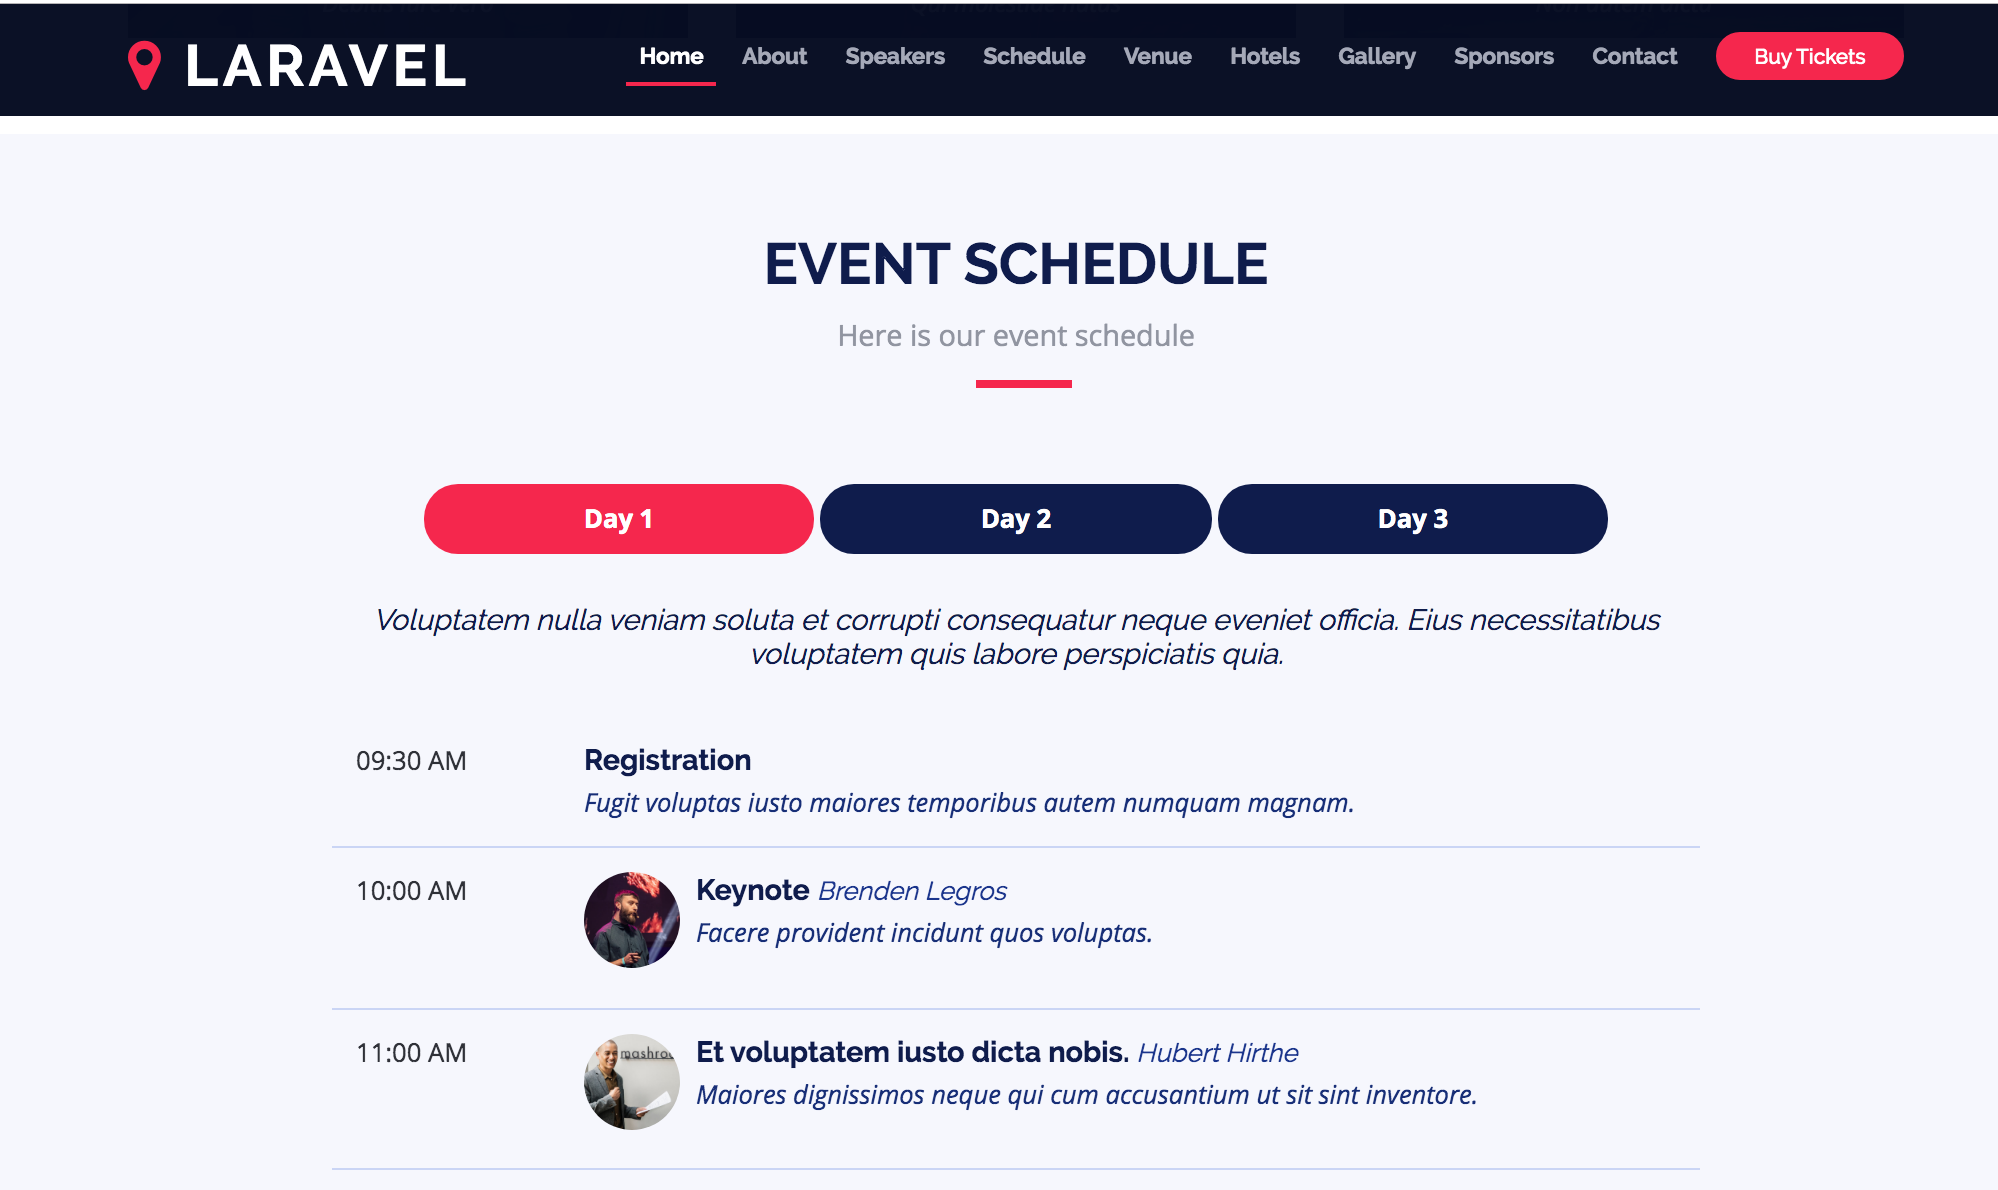 Laravel Conference event schedule